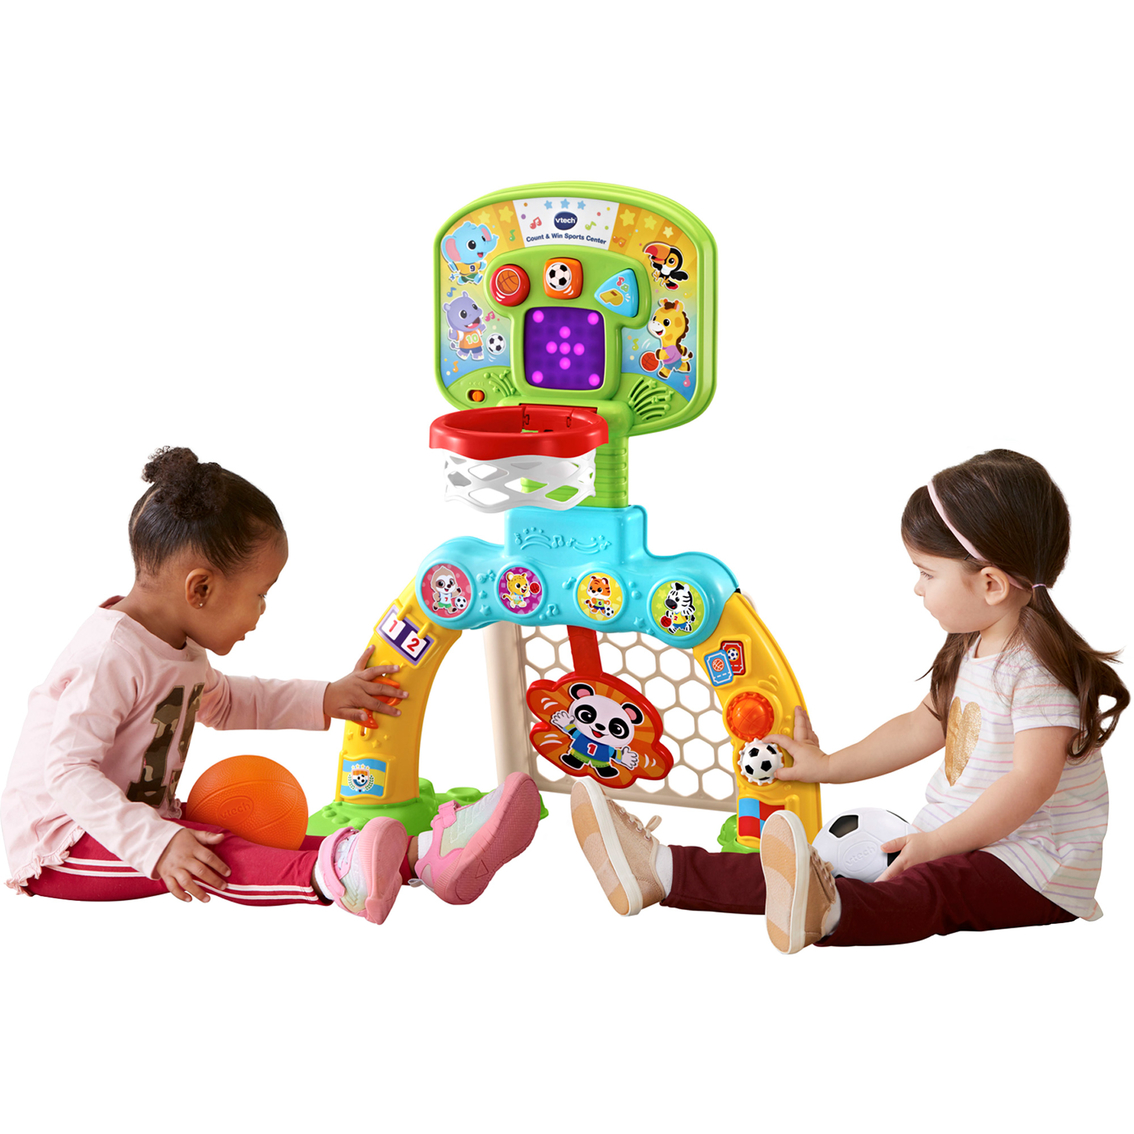 Vtech Count & Win Sports Center - Image 3 of 3